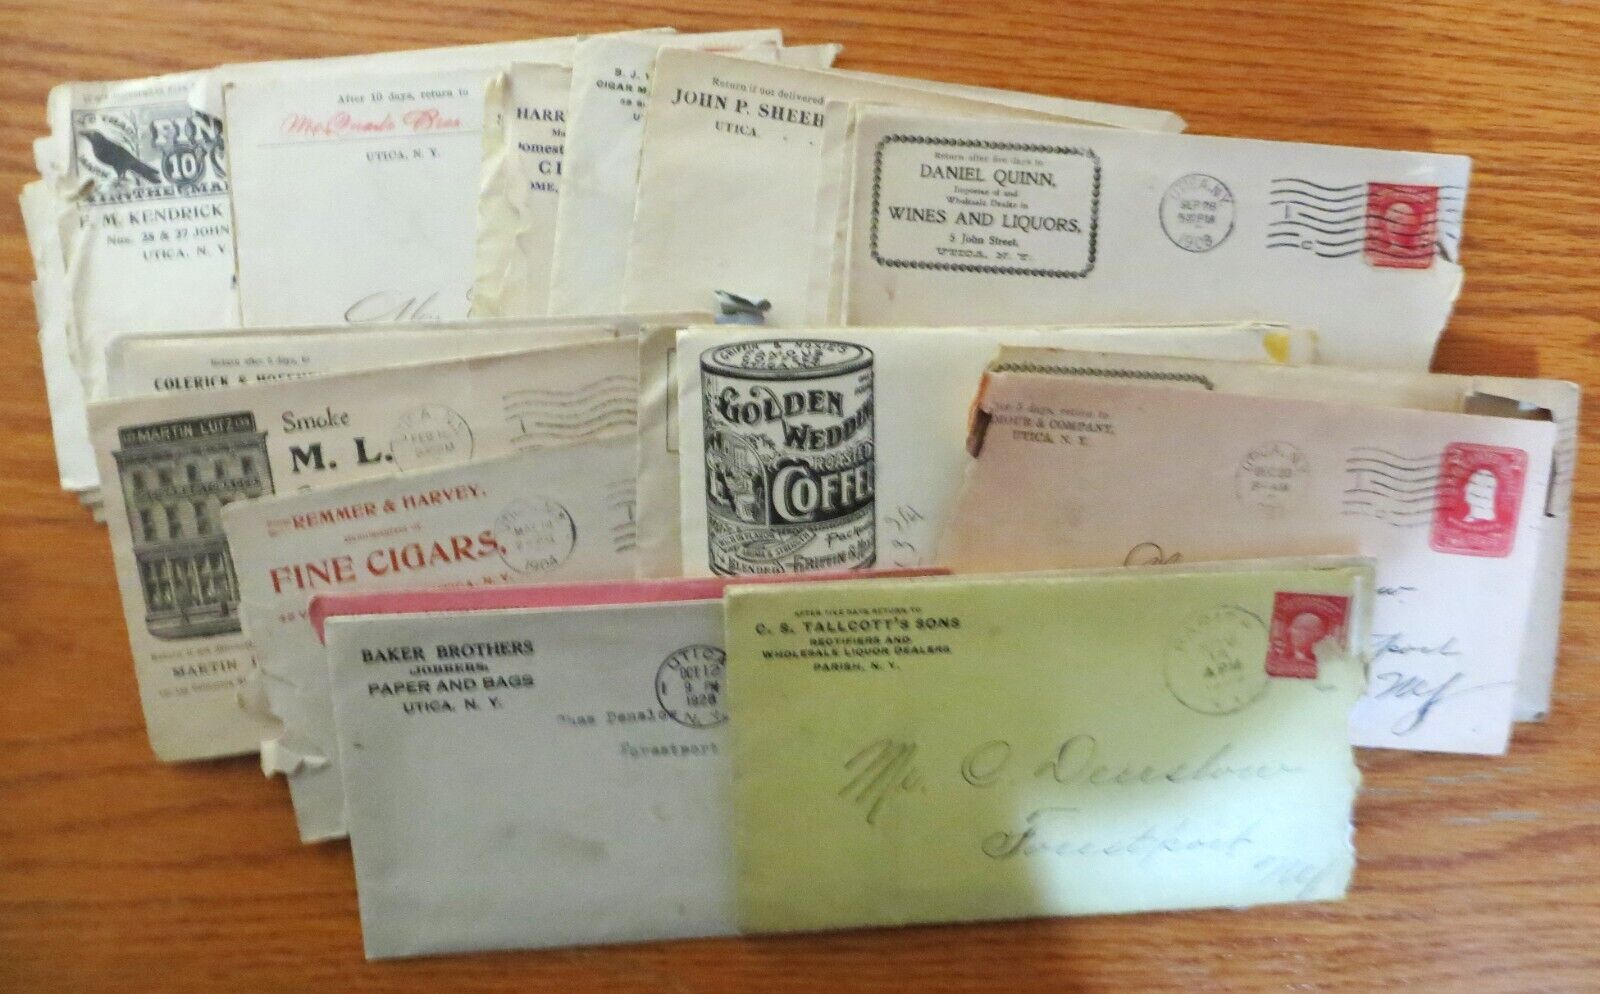 Early 1900's Invoices On Letterheads From Central N. Y. With Original Envelopes